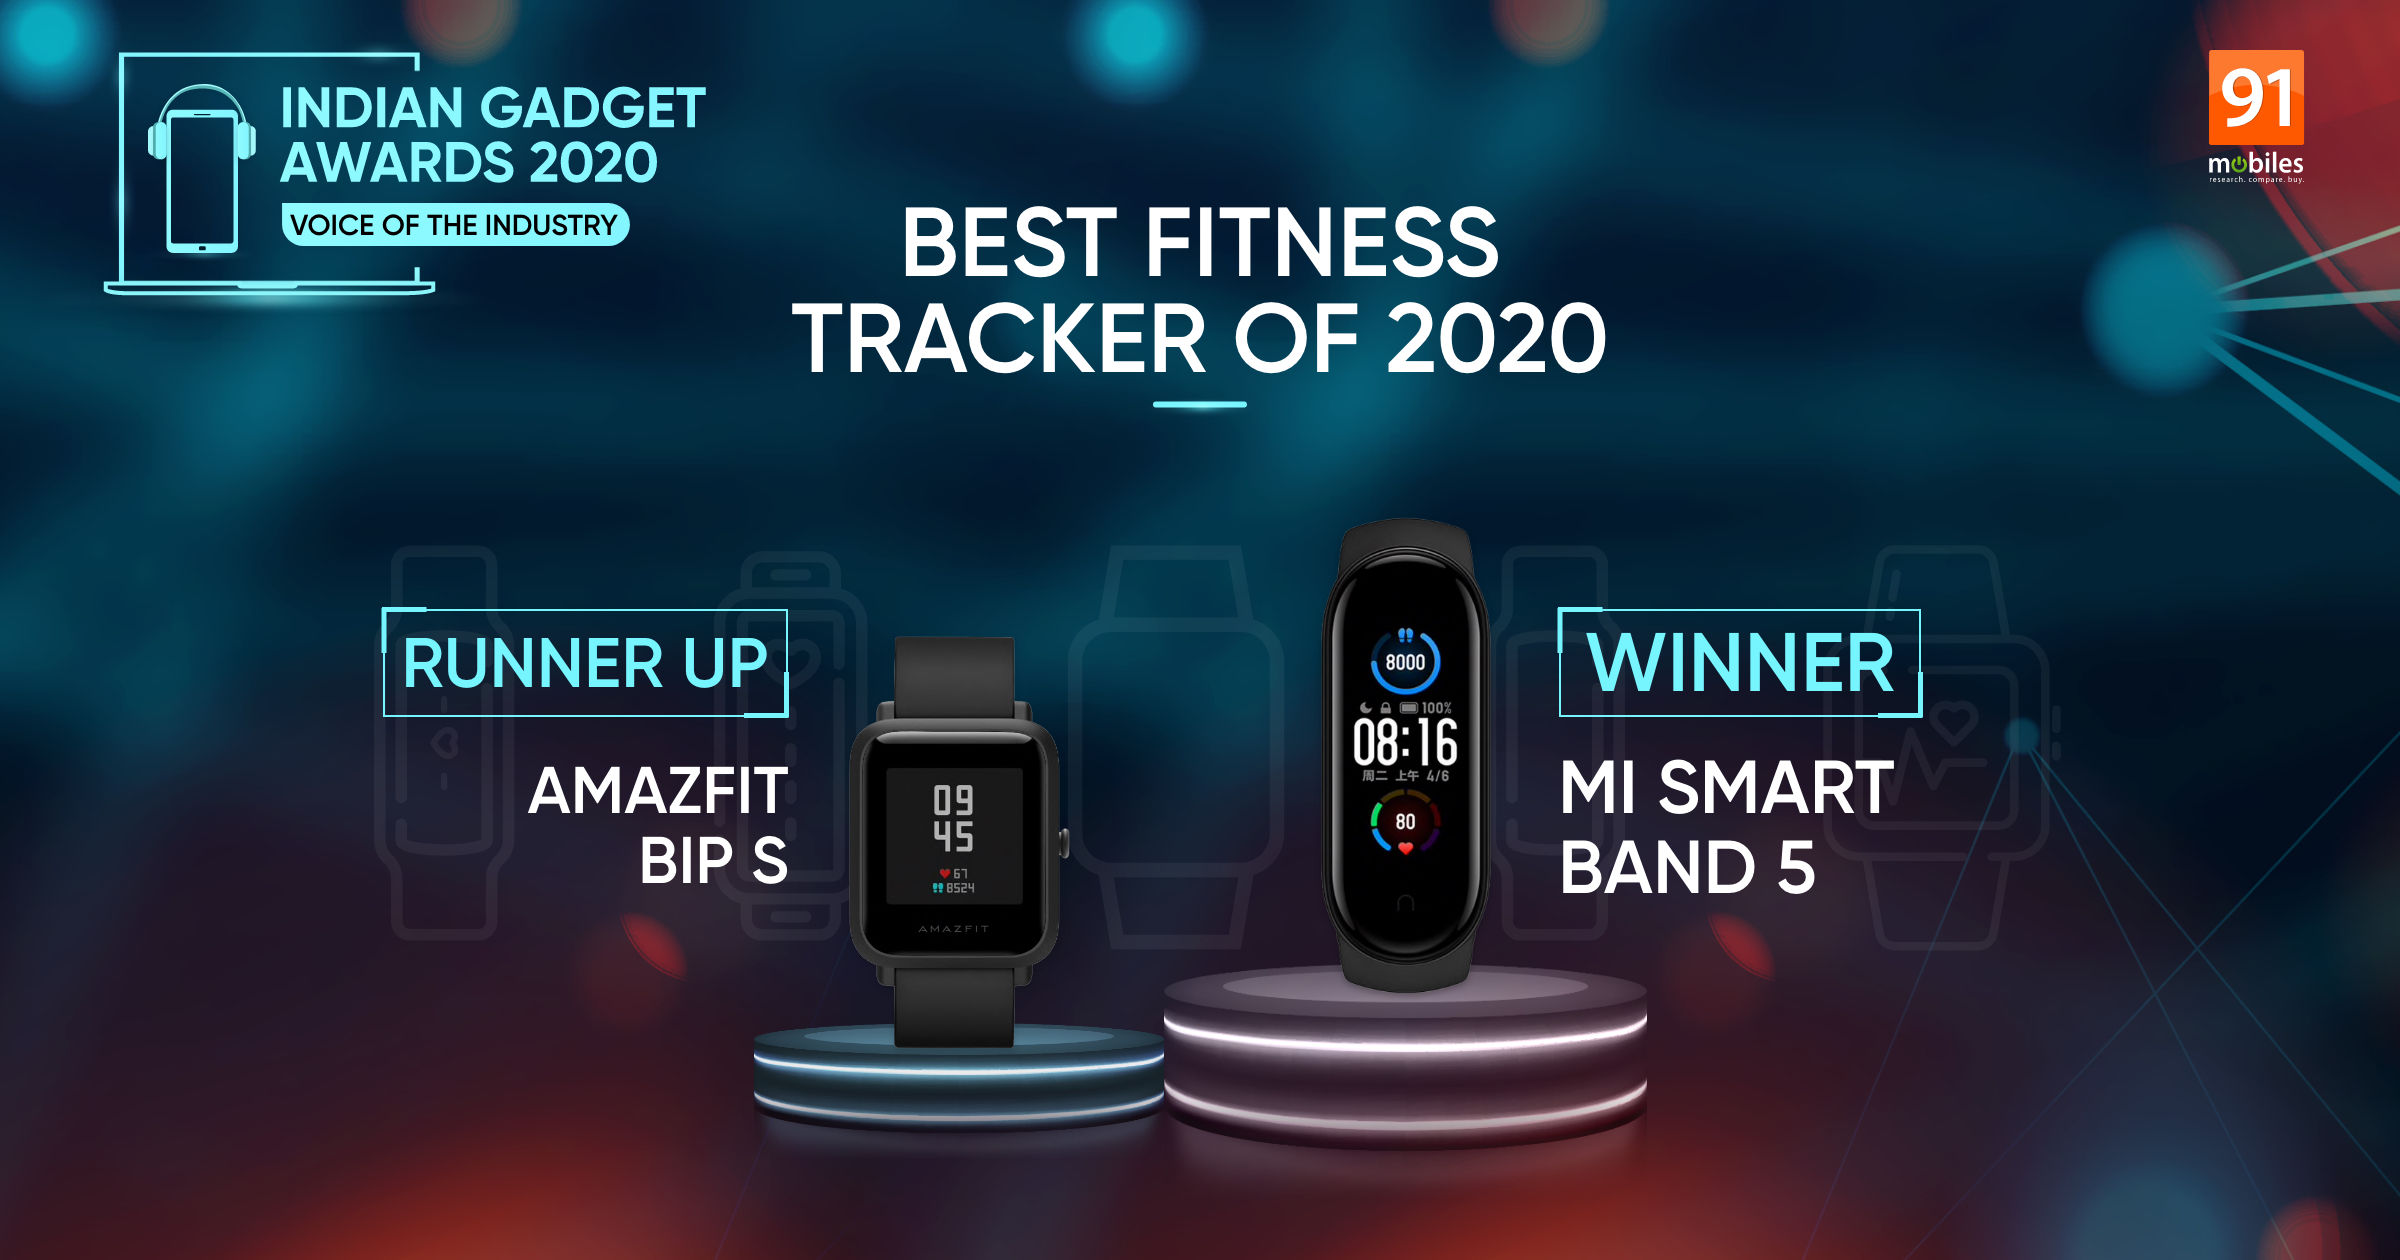 Indian Gadget Awards – Best Fitness Tracker of 2020: intense competition between Mi Smart Band 5 and Amazfit Bip S